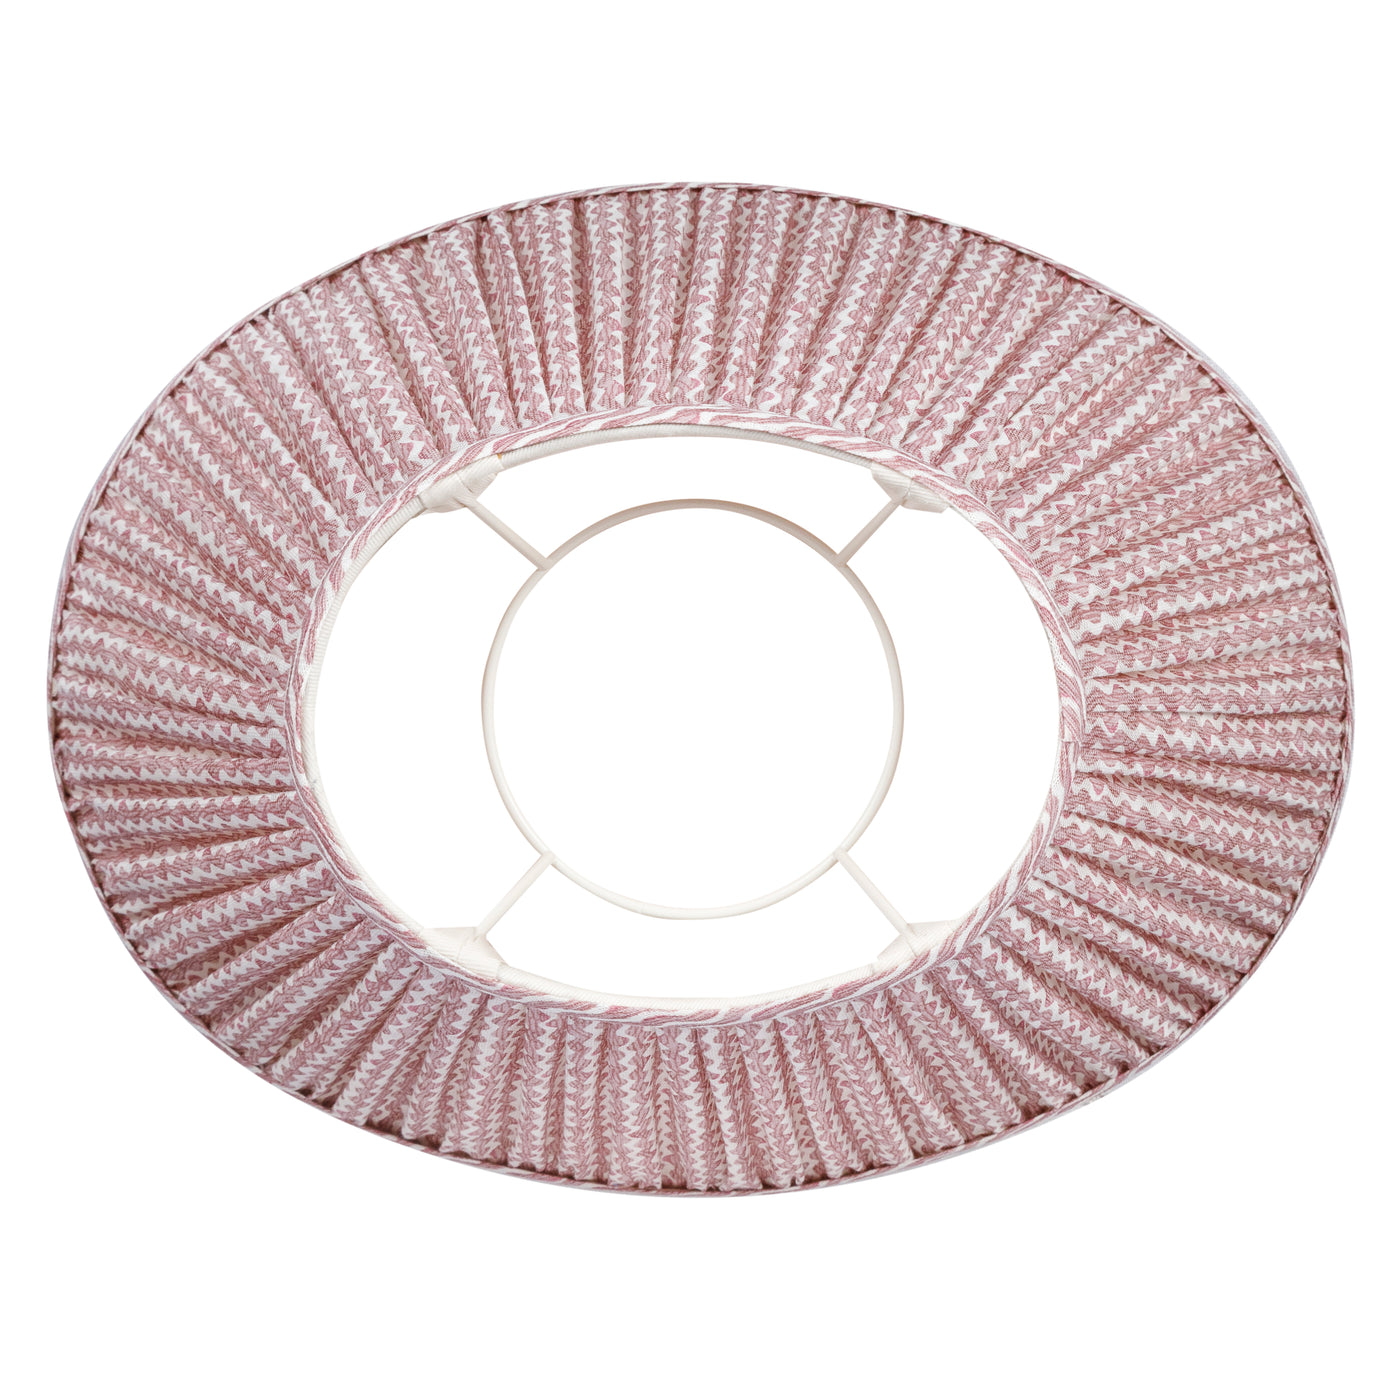 Oval Fermoie Lampshade - Popple in Pink | Newport Lamp And Shade | Located in Newport, RI